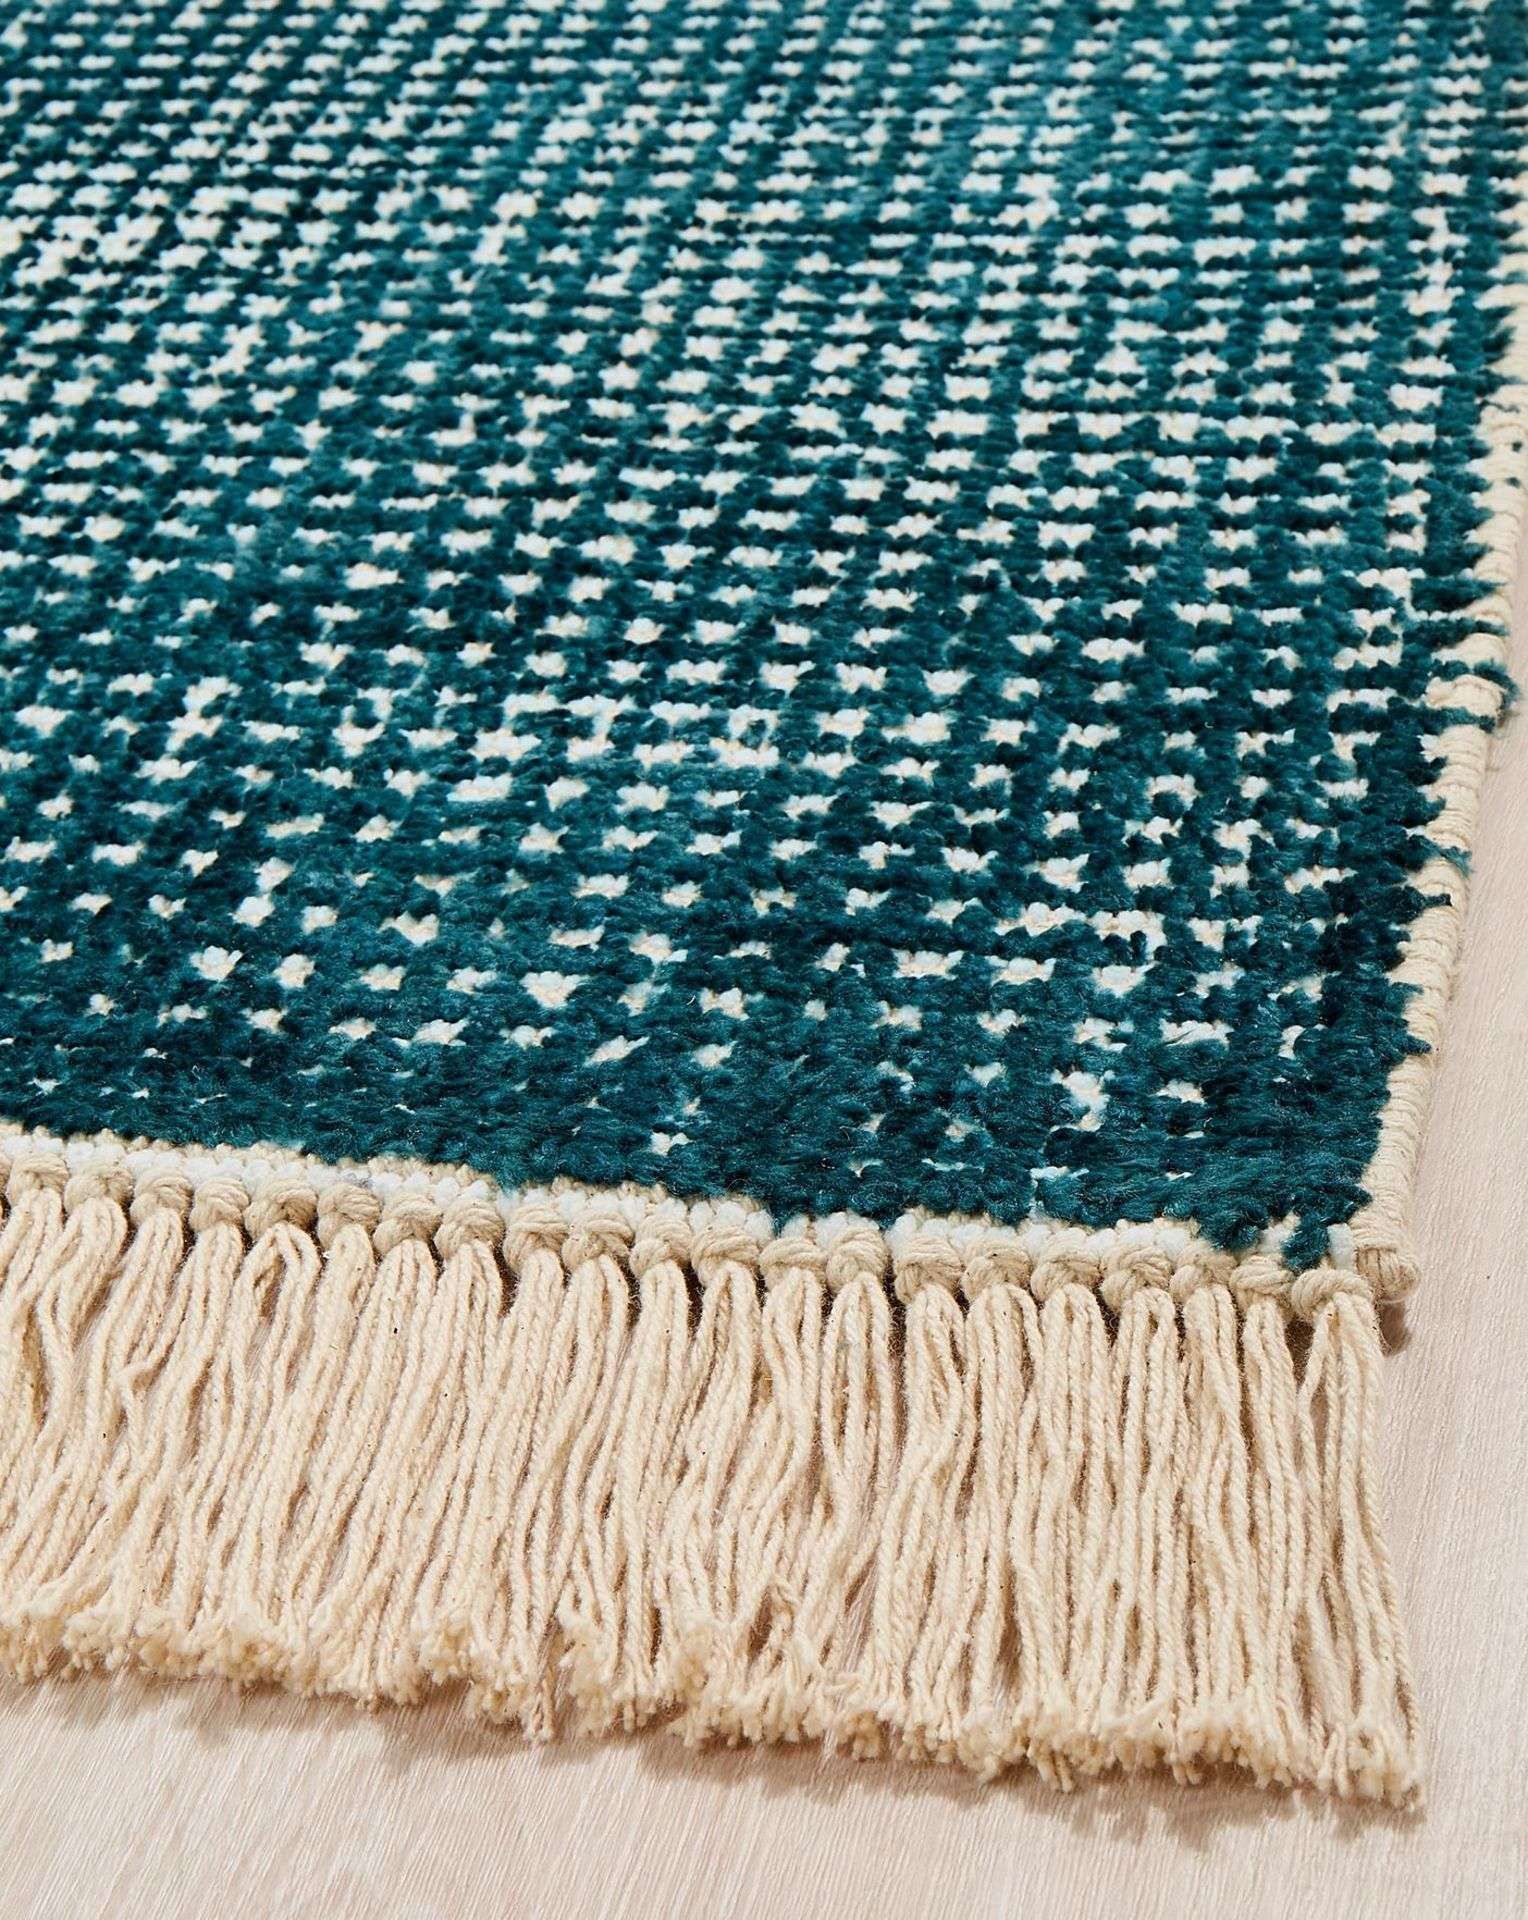 2x BRAND NEW Hallie Woven Fringe Rug 80CM X 150CM. TEAL. RRP £69 EACH. A woven design that is soft - Image 2 of 2